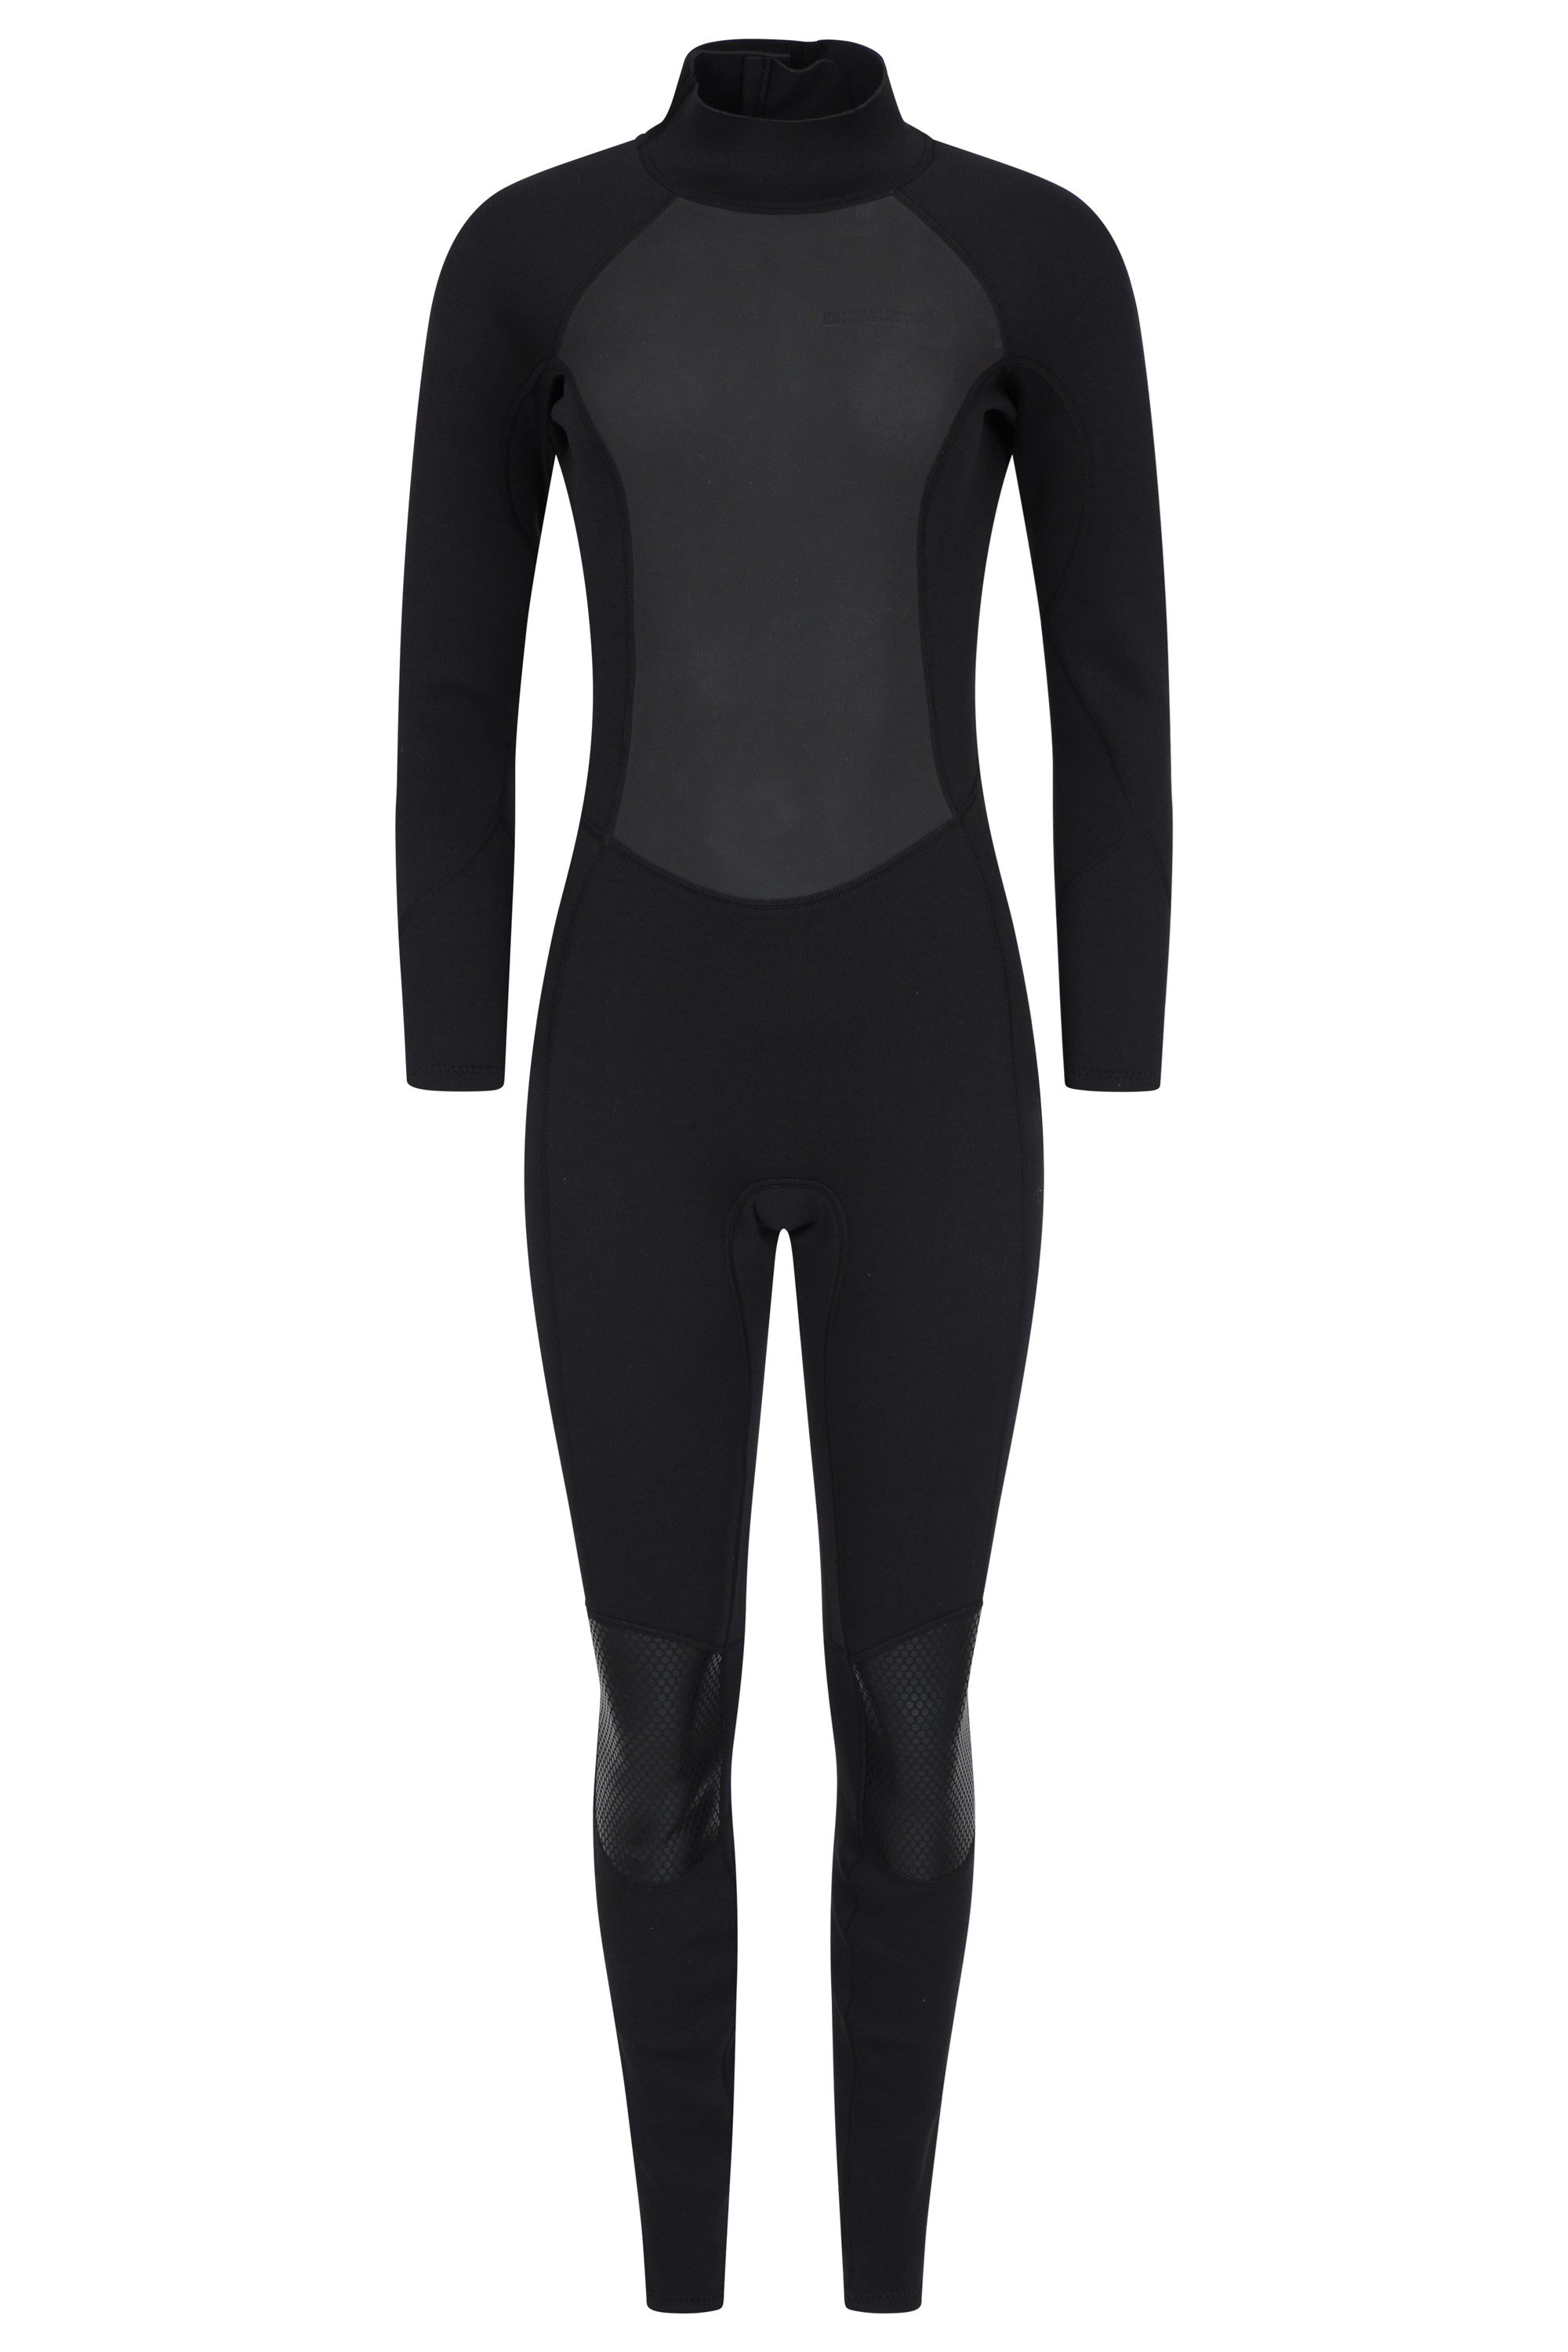 Womens Full Wetsuit - Charcoal